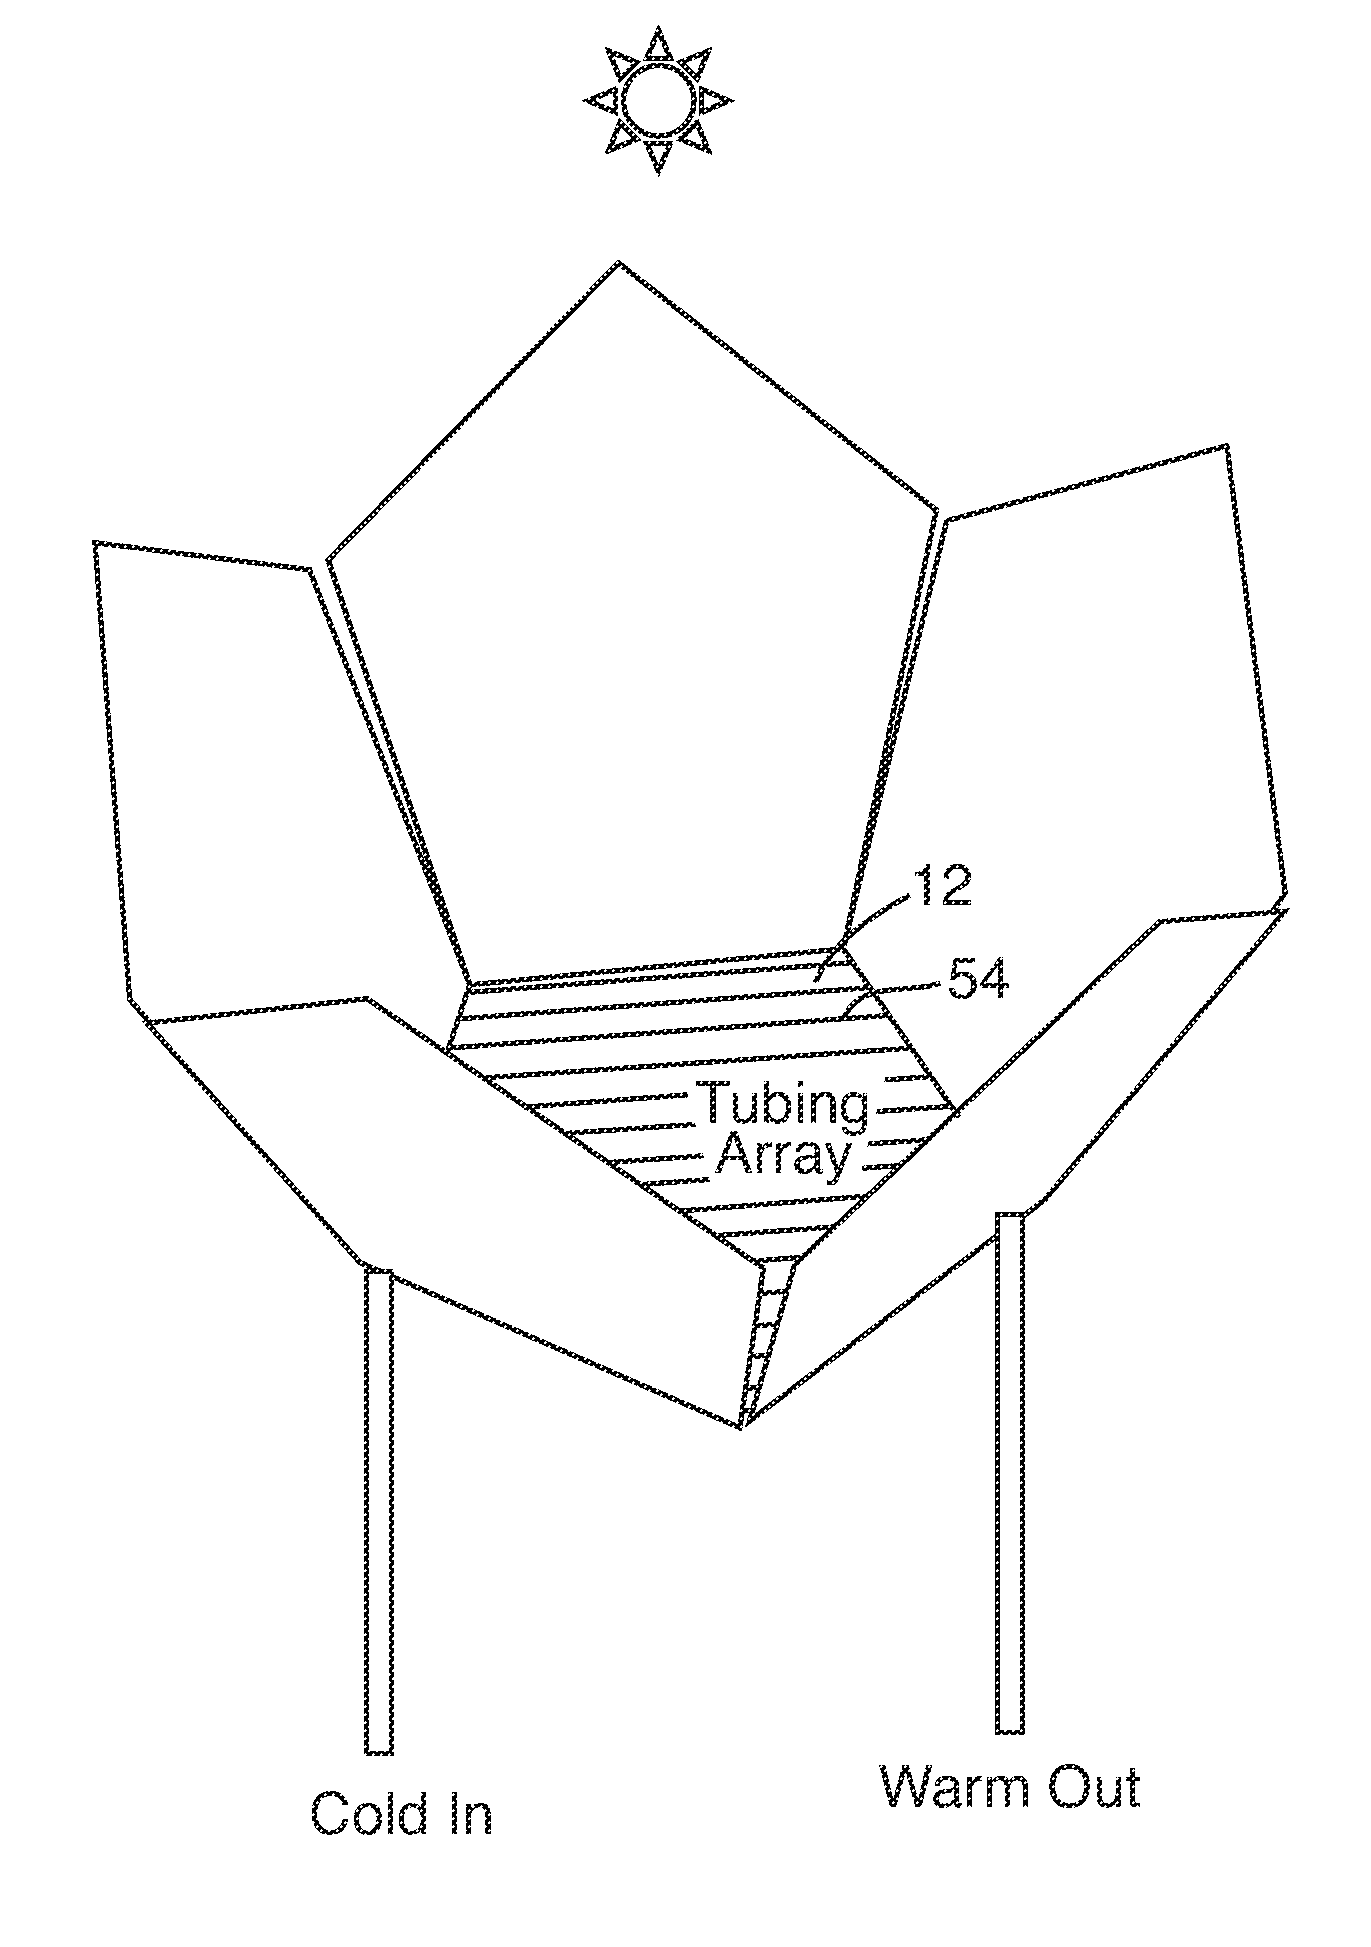 Apparatus for concentration and conversion of solar energy